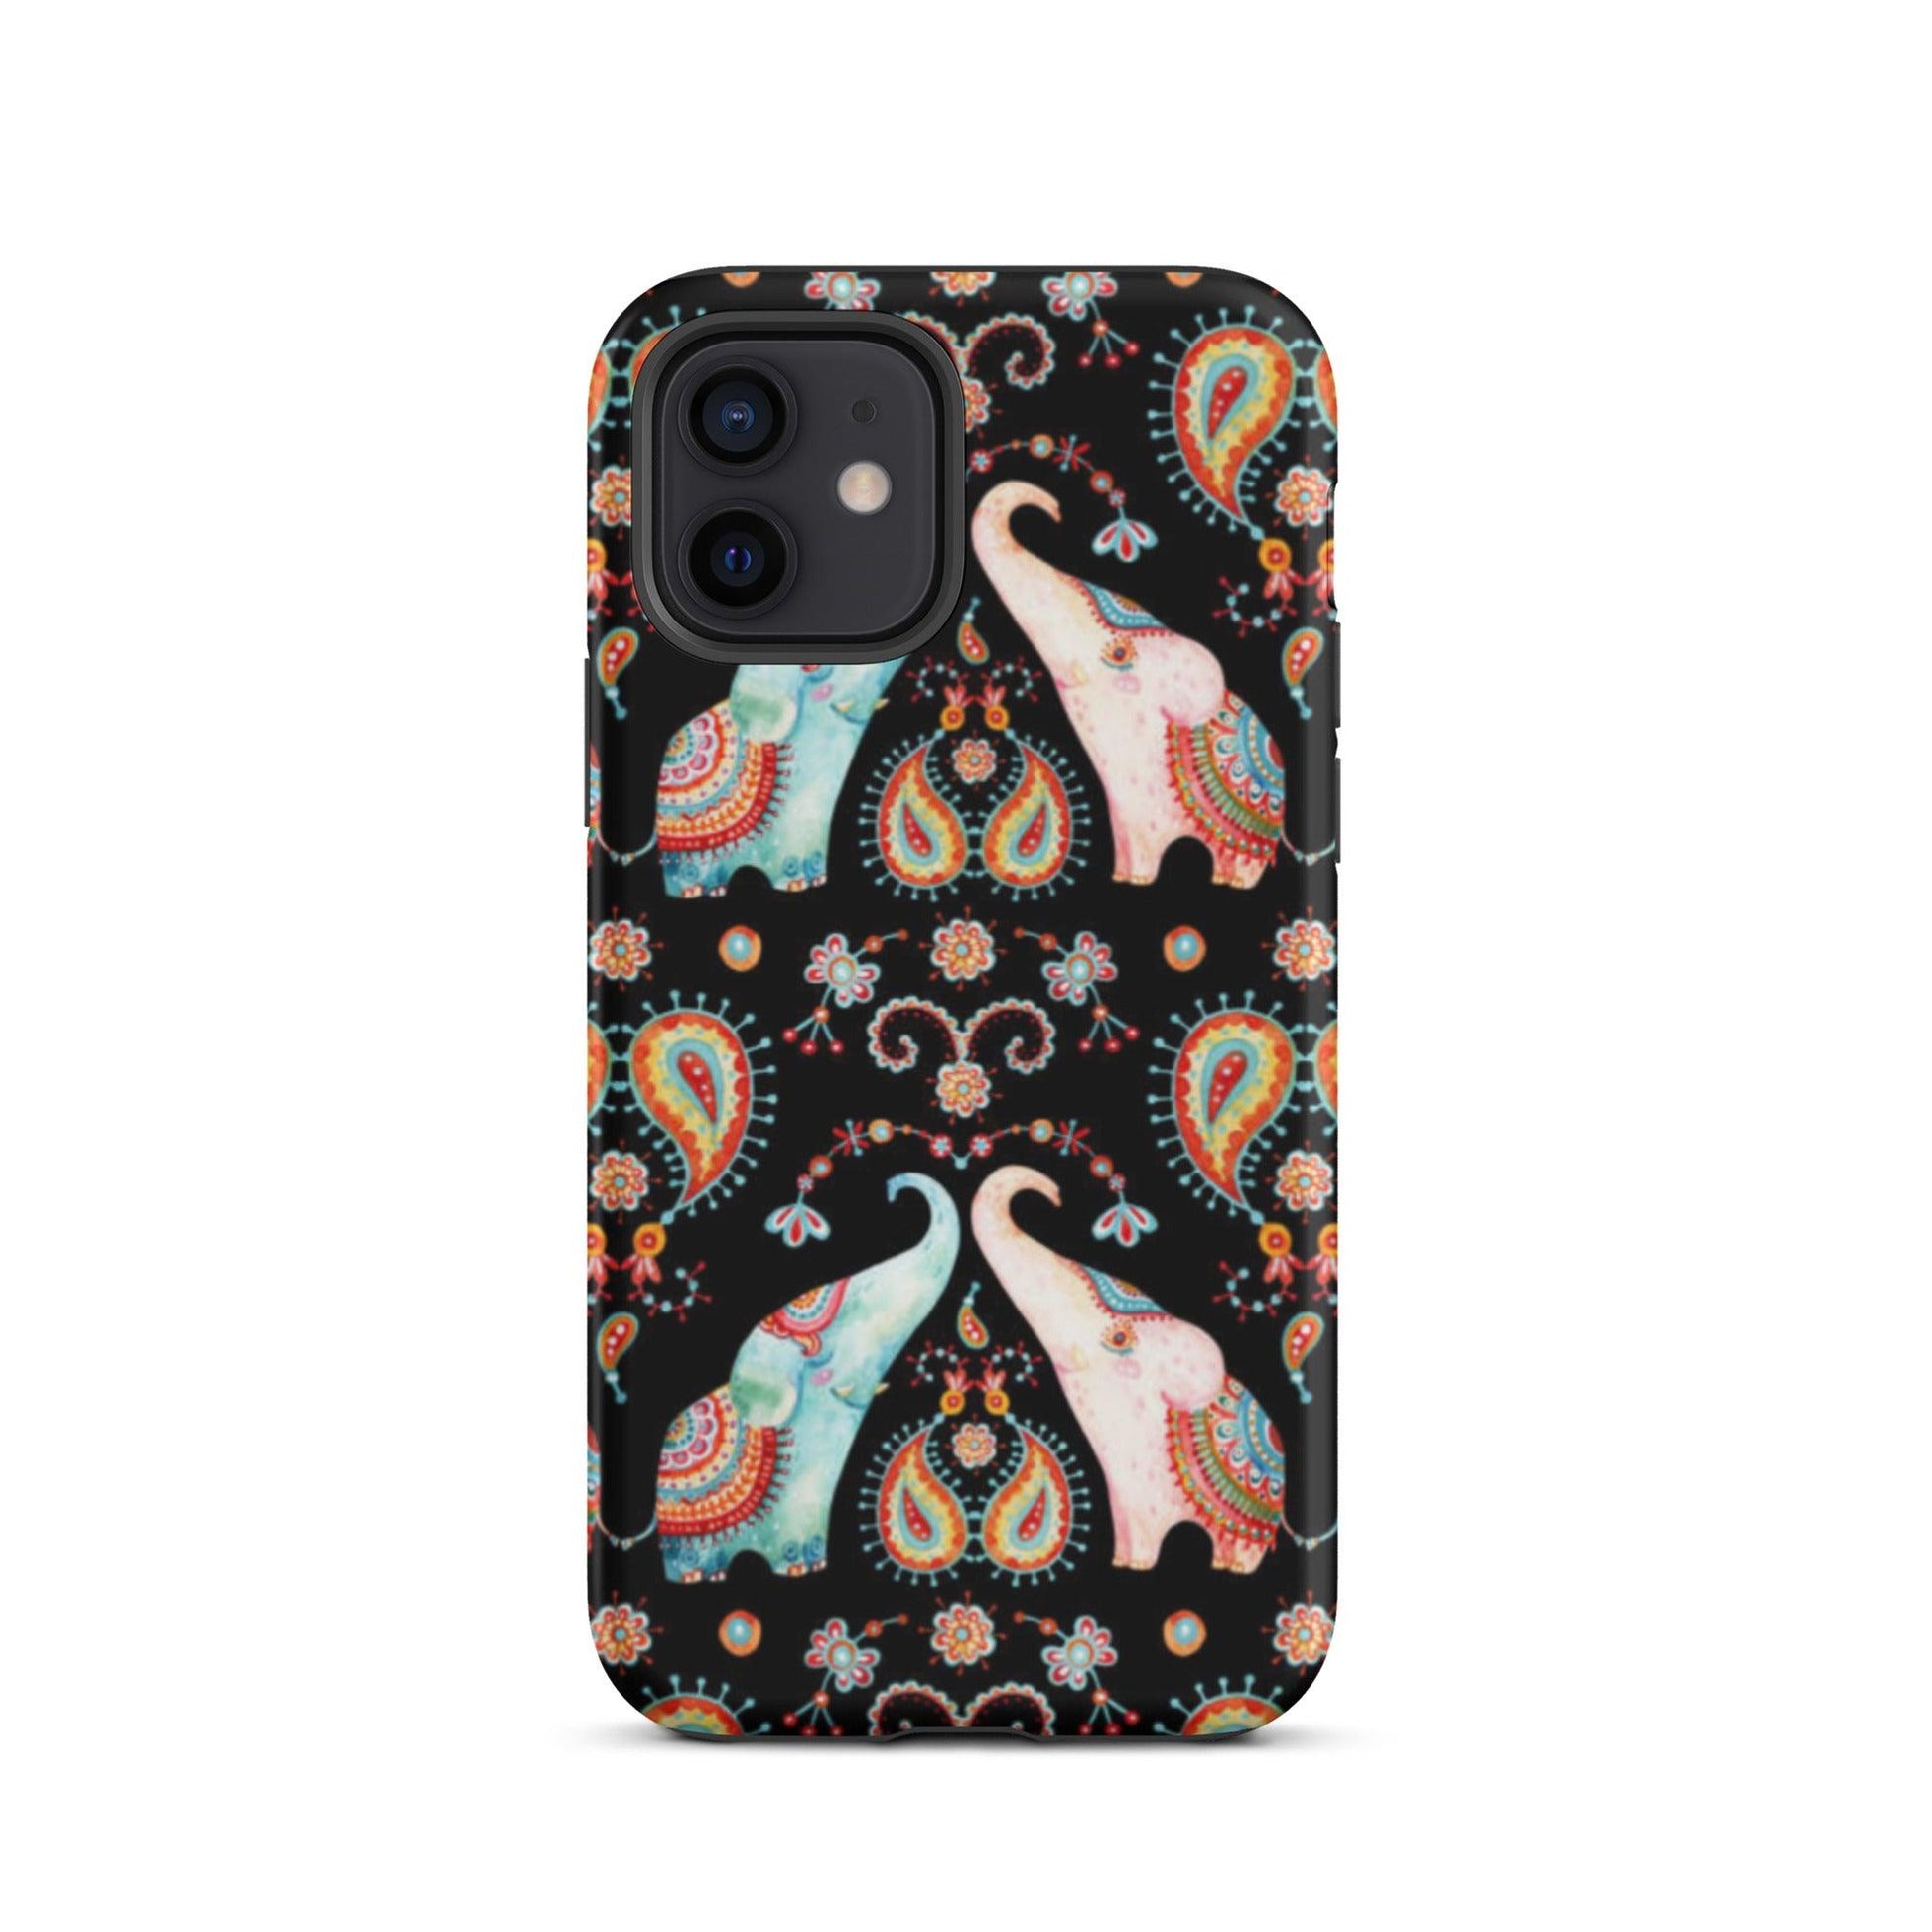 Indian Elephants Tough iPhone case - The Global Wanderer